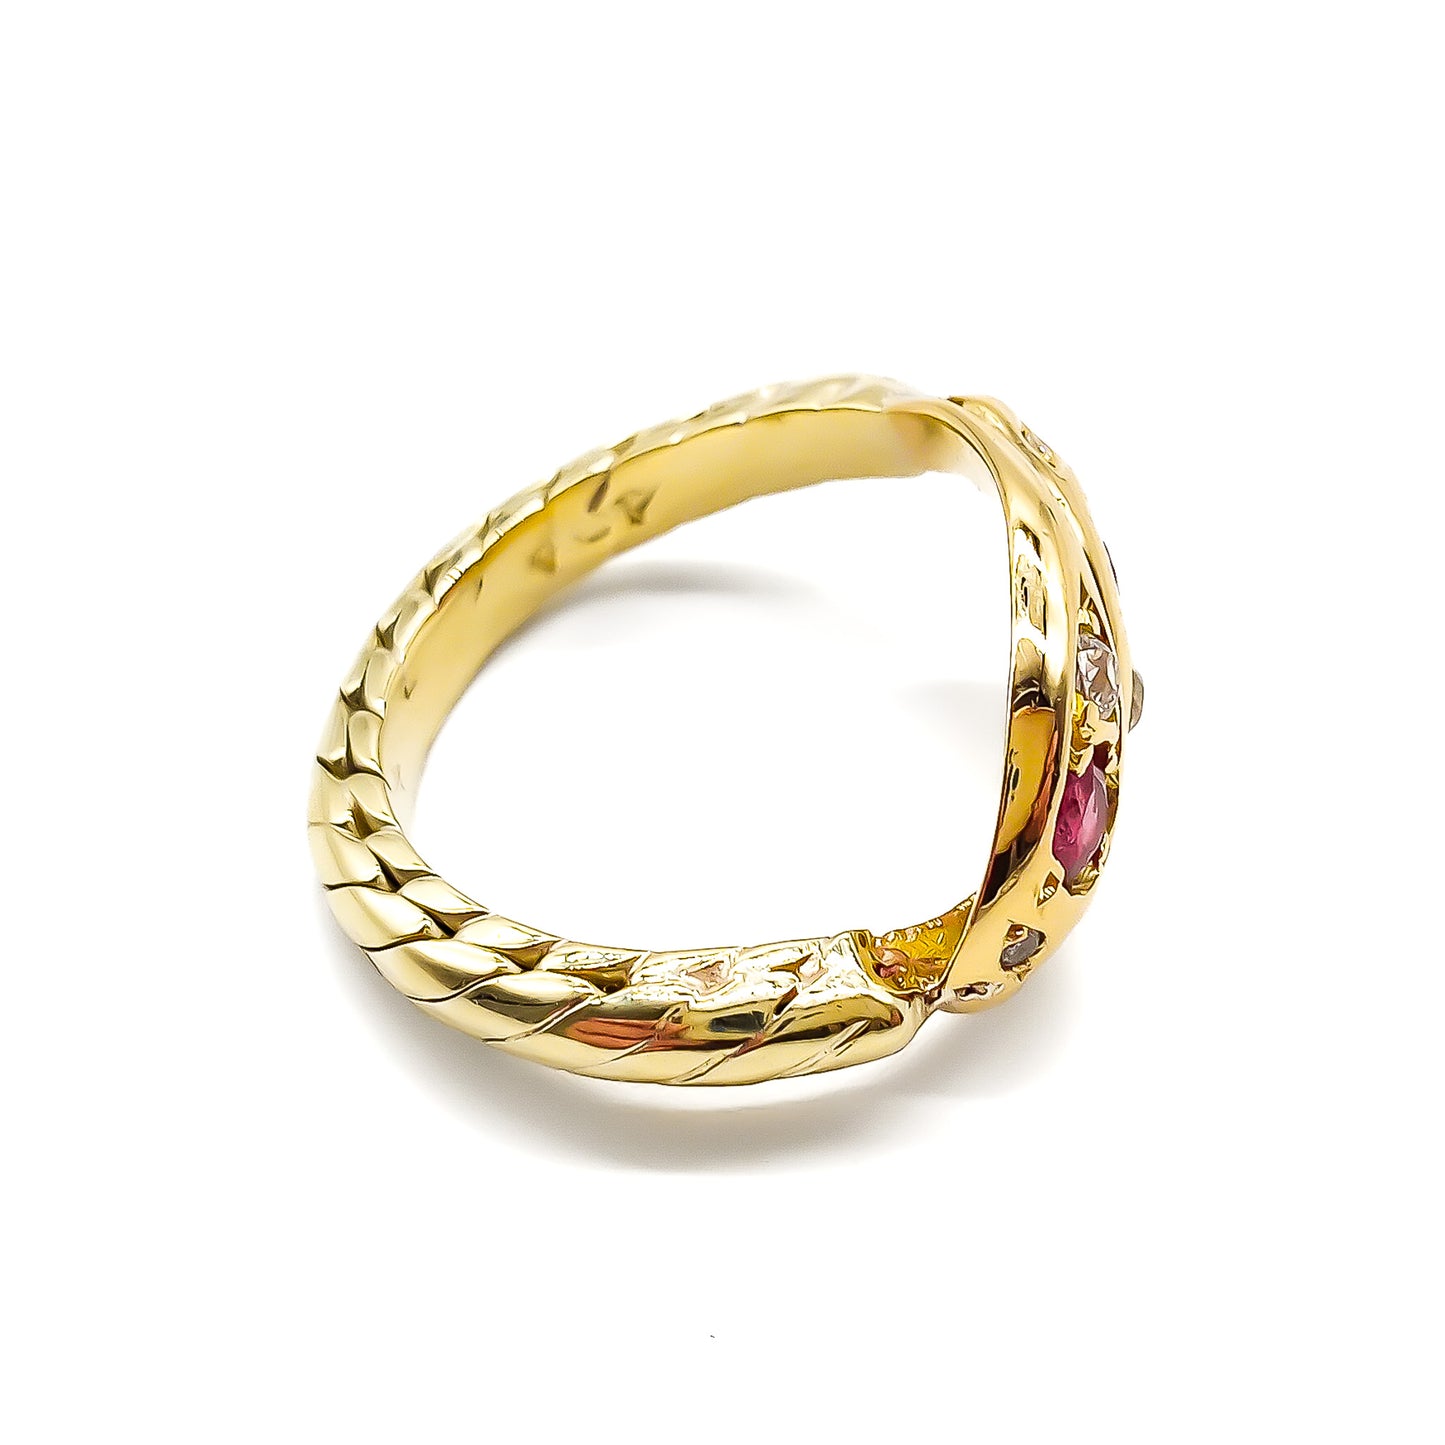 Stunning Victorian 9ct gold snake ring set with two rubies and six old-cut diamonds.